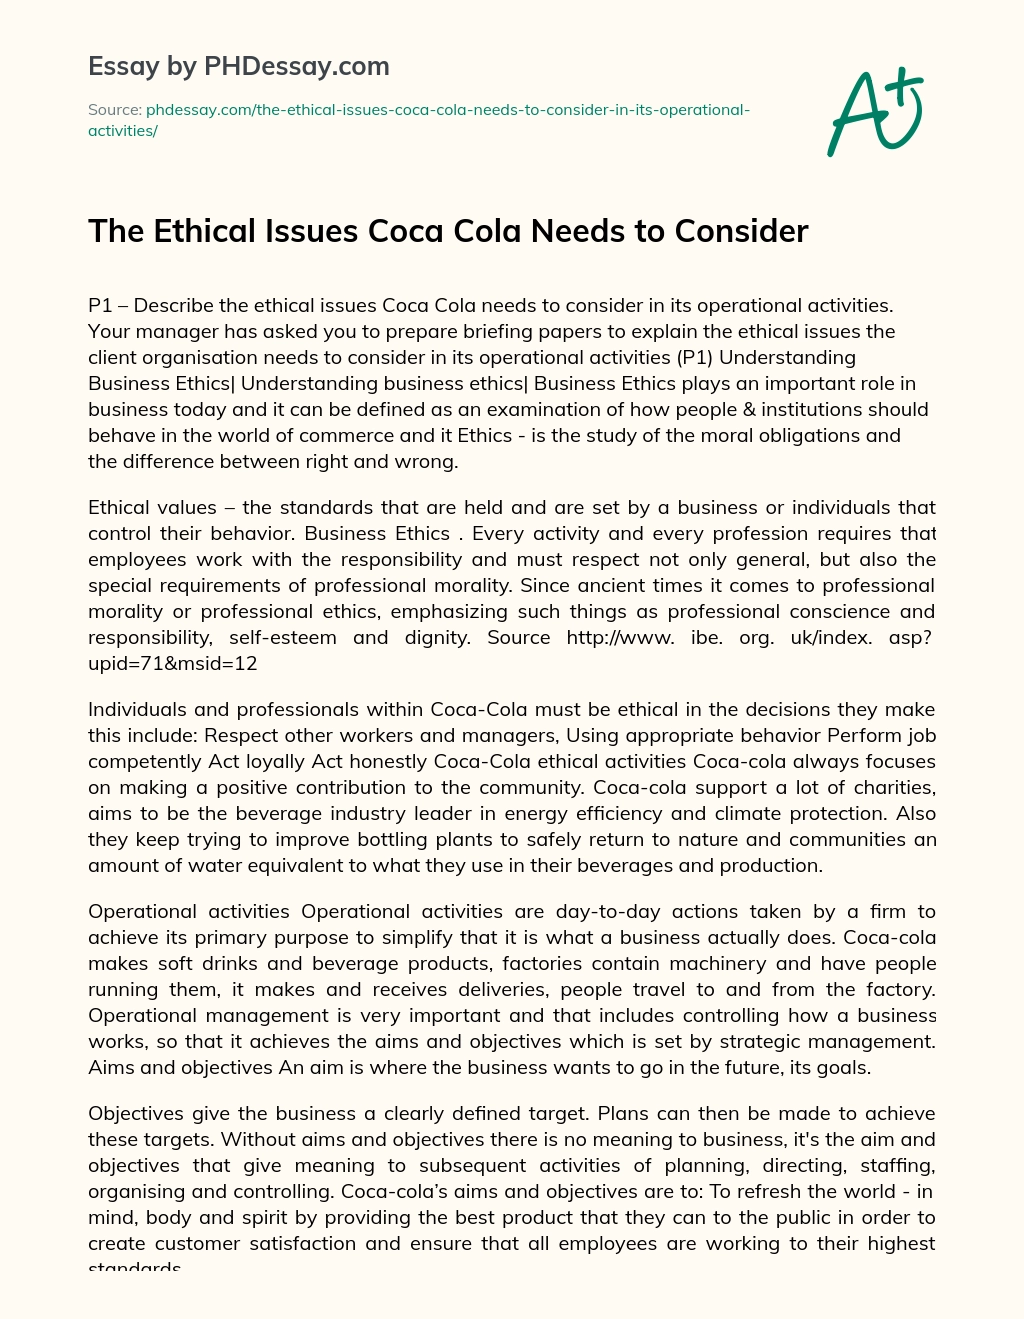 The Ethical Issues Coca Cola Needs to Consider essay